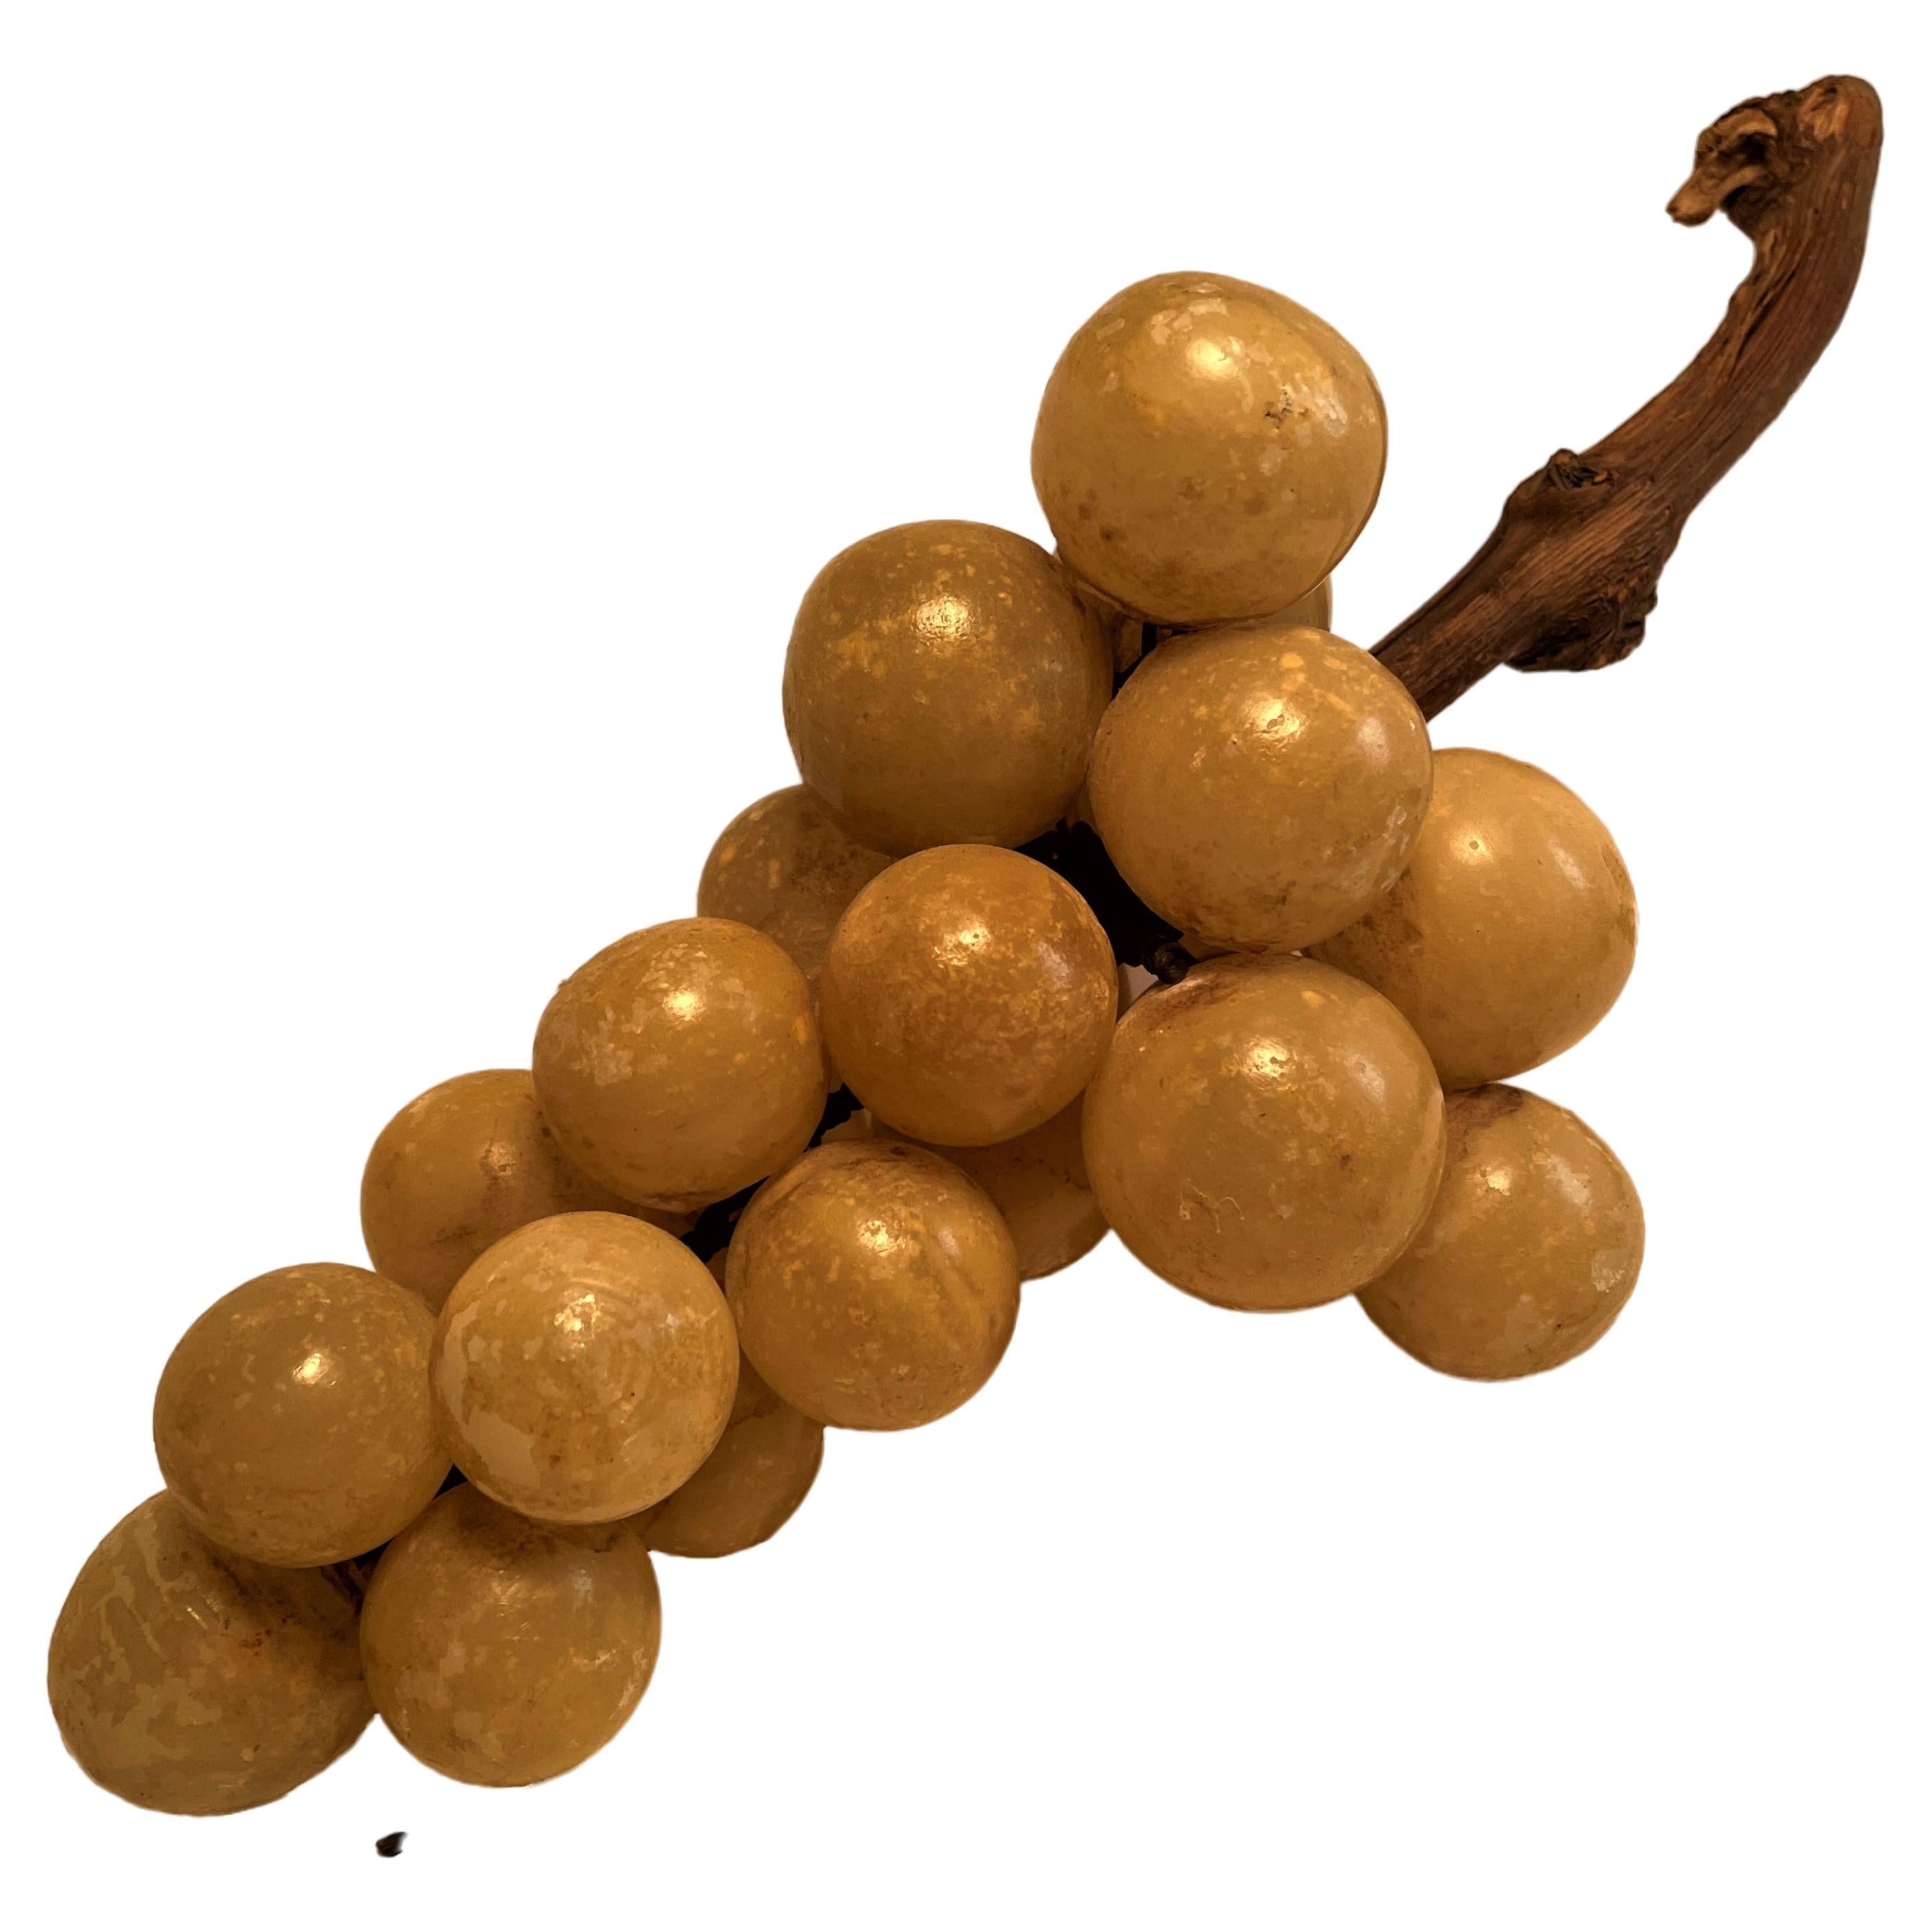 This is a fun, decorative bunch of alabaster grapes which have a shiny finish on them, the finish has aged and has worn off of some grapes and is pitted or chipped on others. The effect gives the grapes an interesting and appealing look. They are